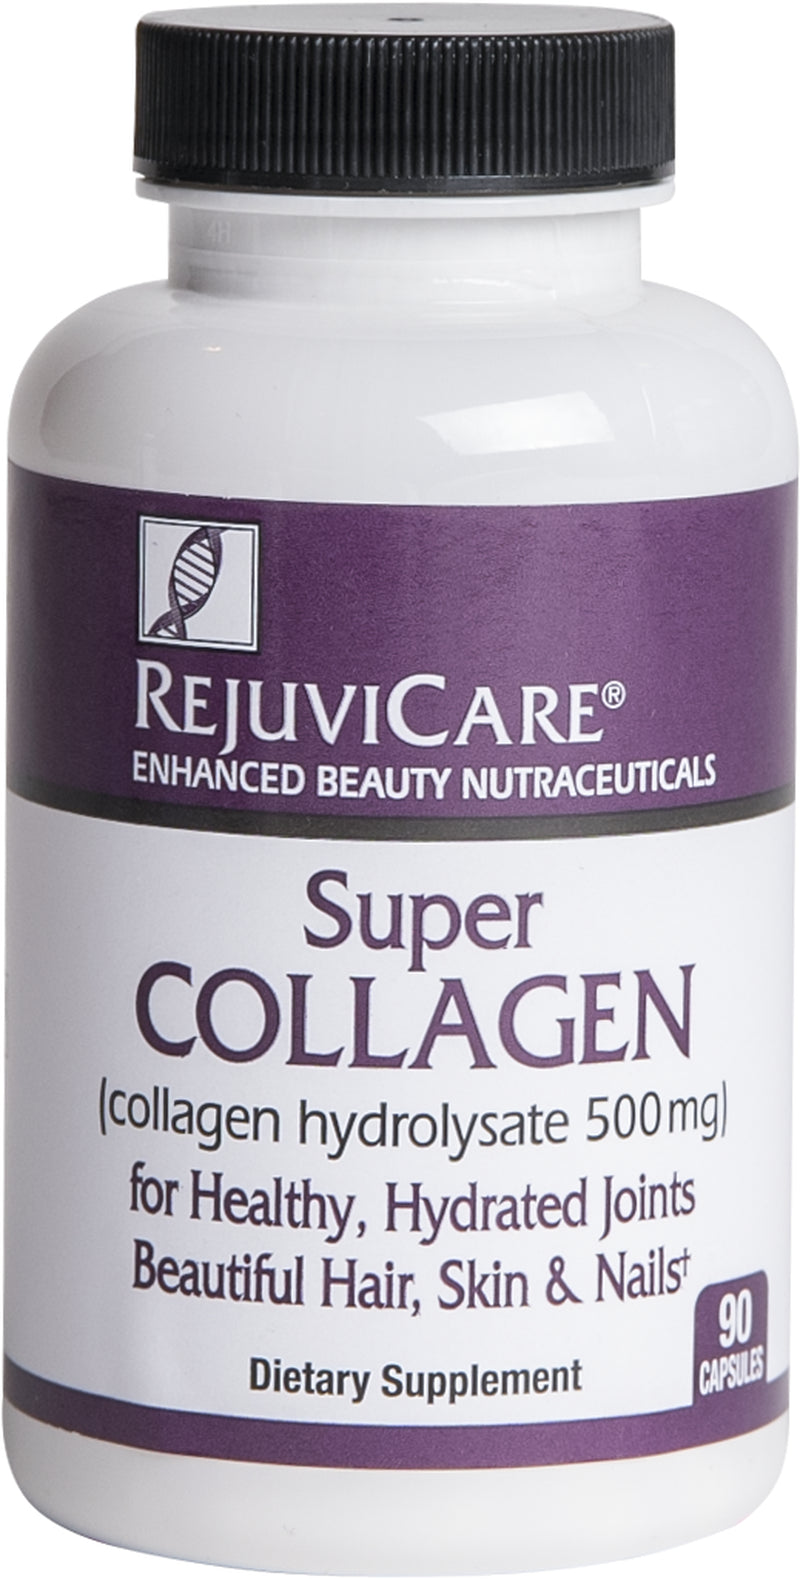 Rejuvicare Super Collagen Capsules for Beauty, Healthy Joints, Hair, Skin, Nails, 90 Servings